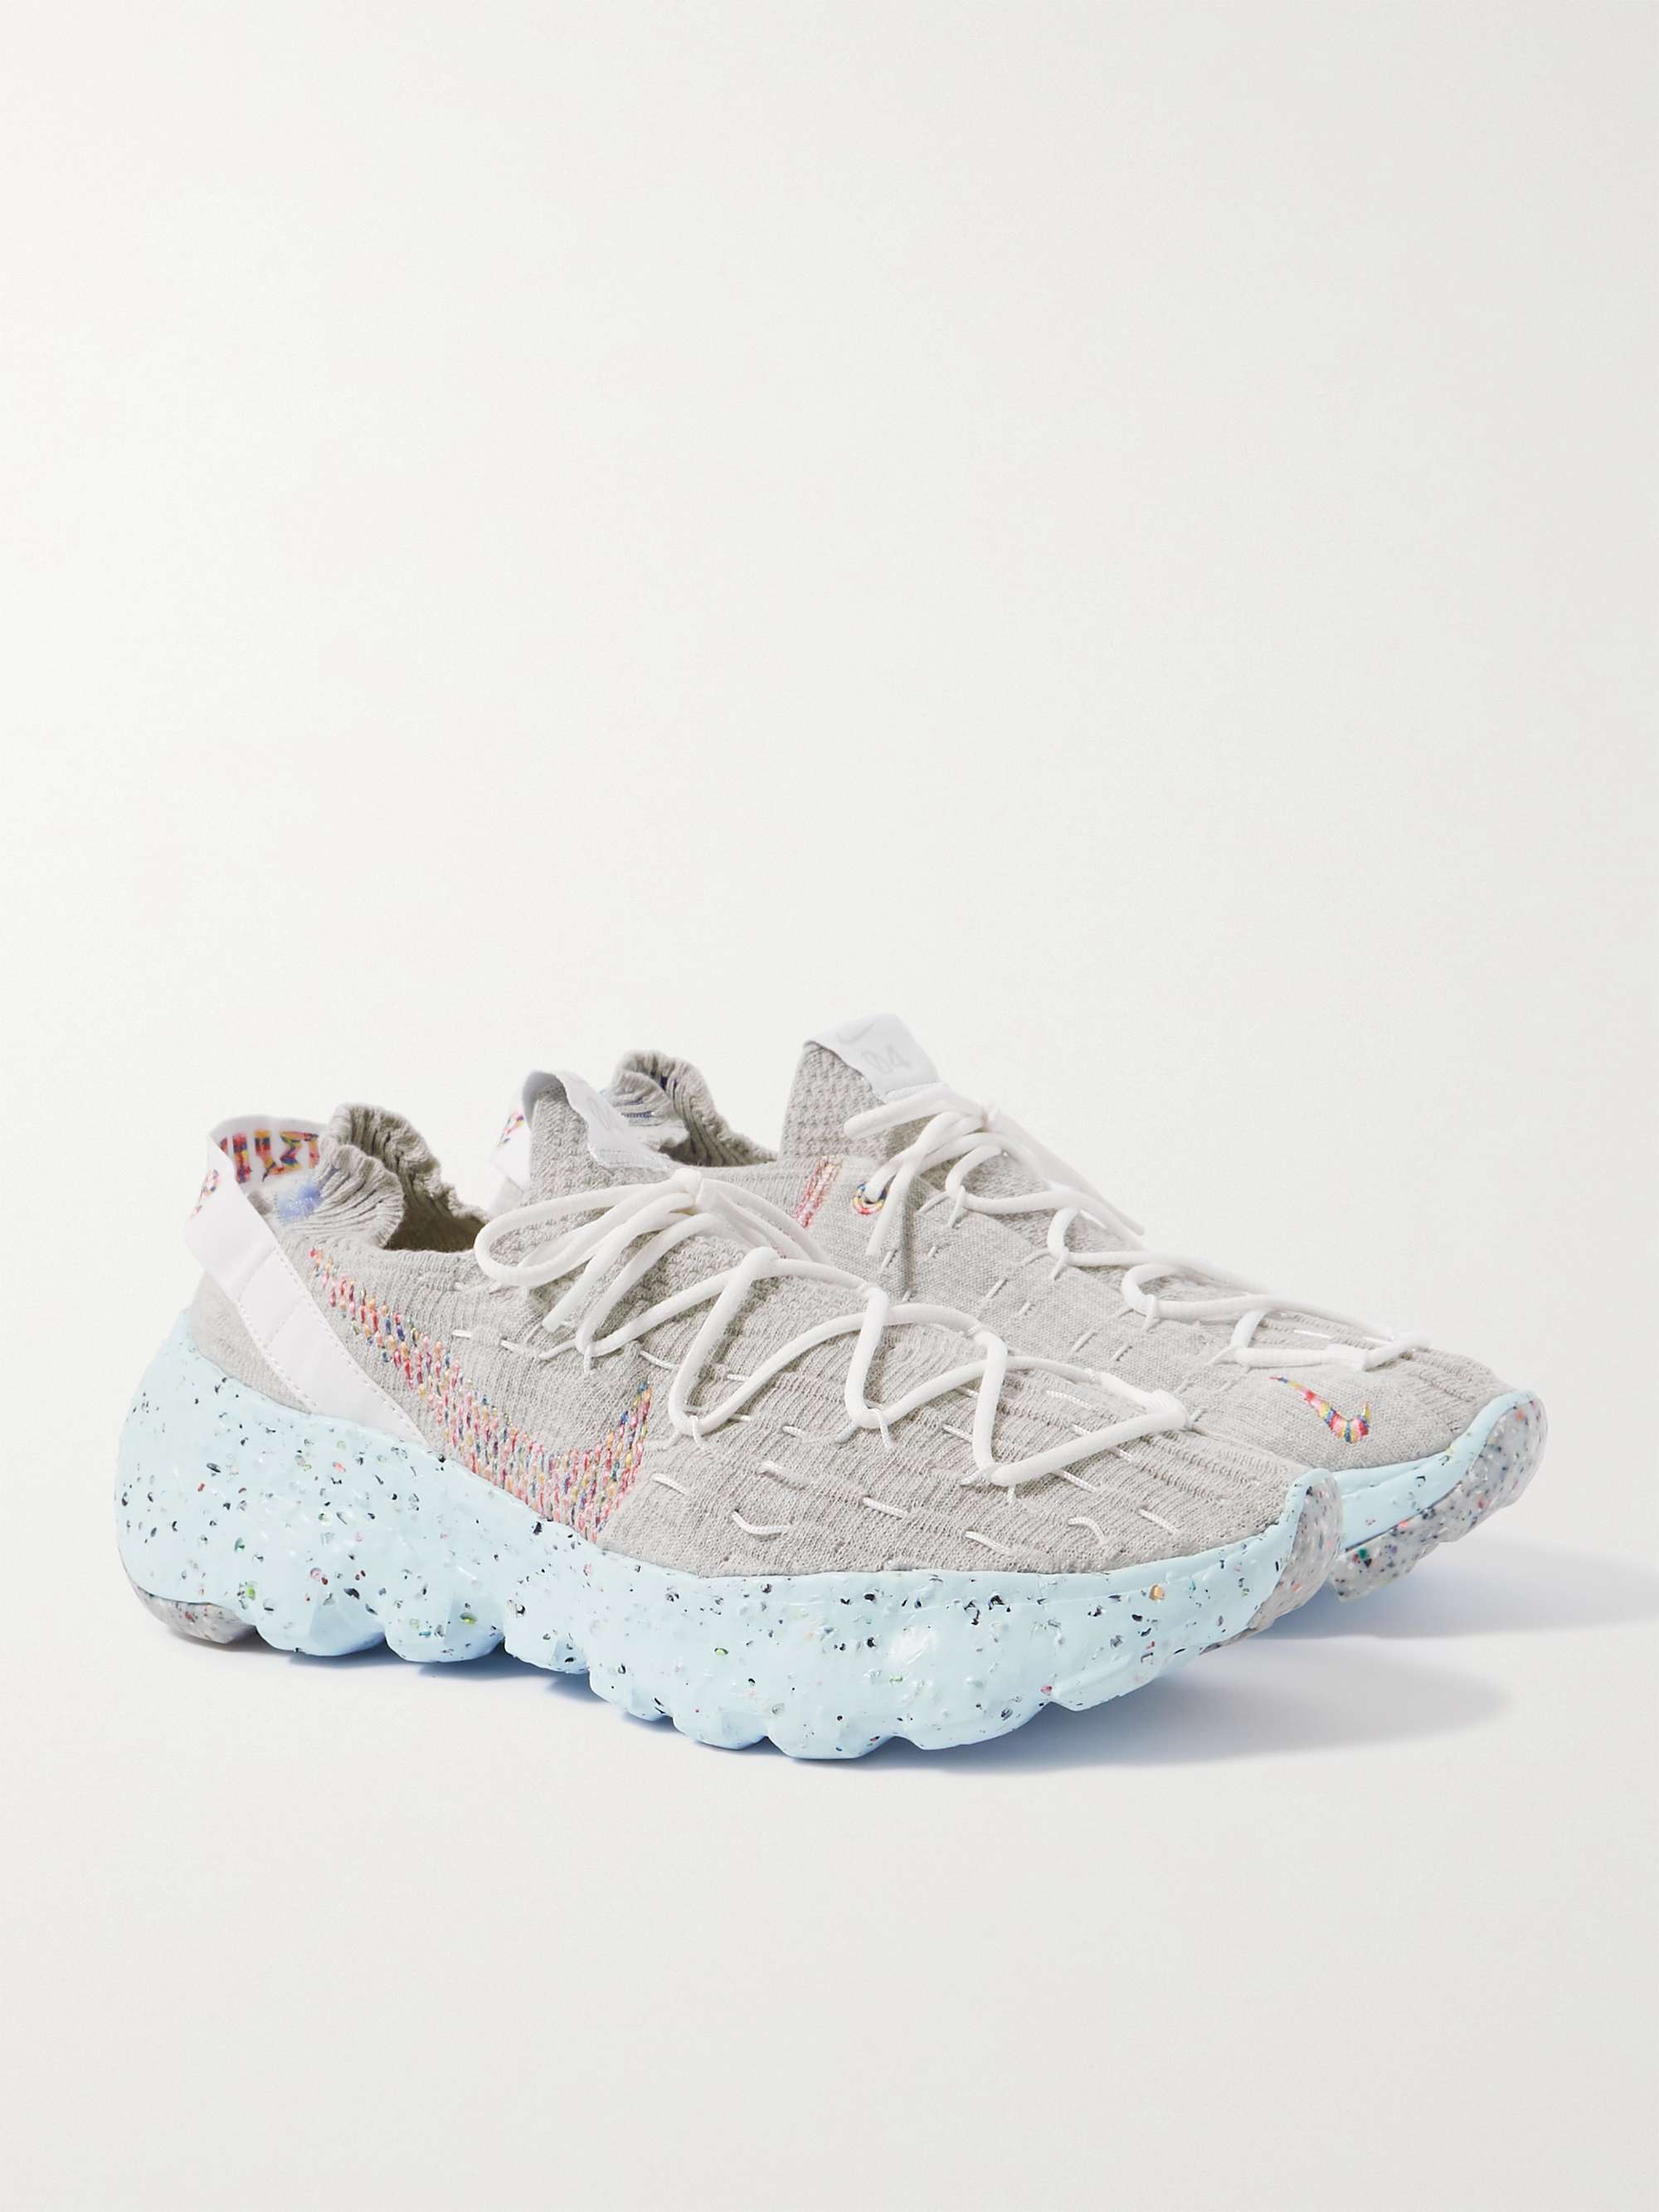 NIKE Space Hippie 04 Stretch-Knit Sneakers